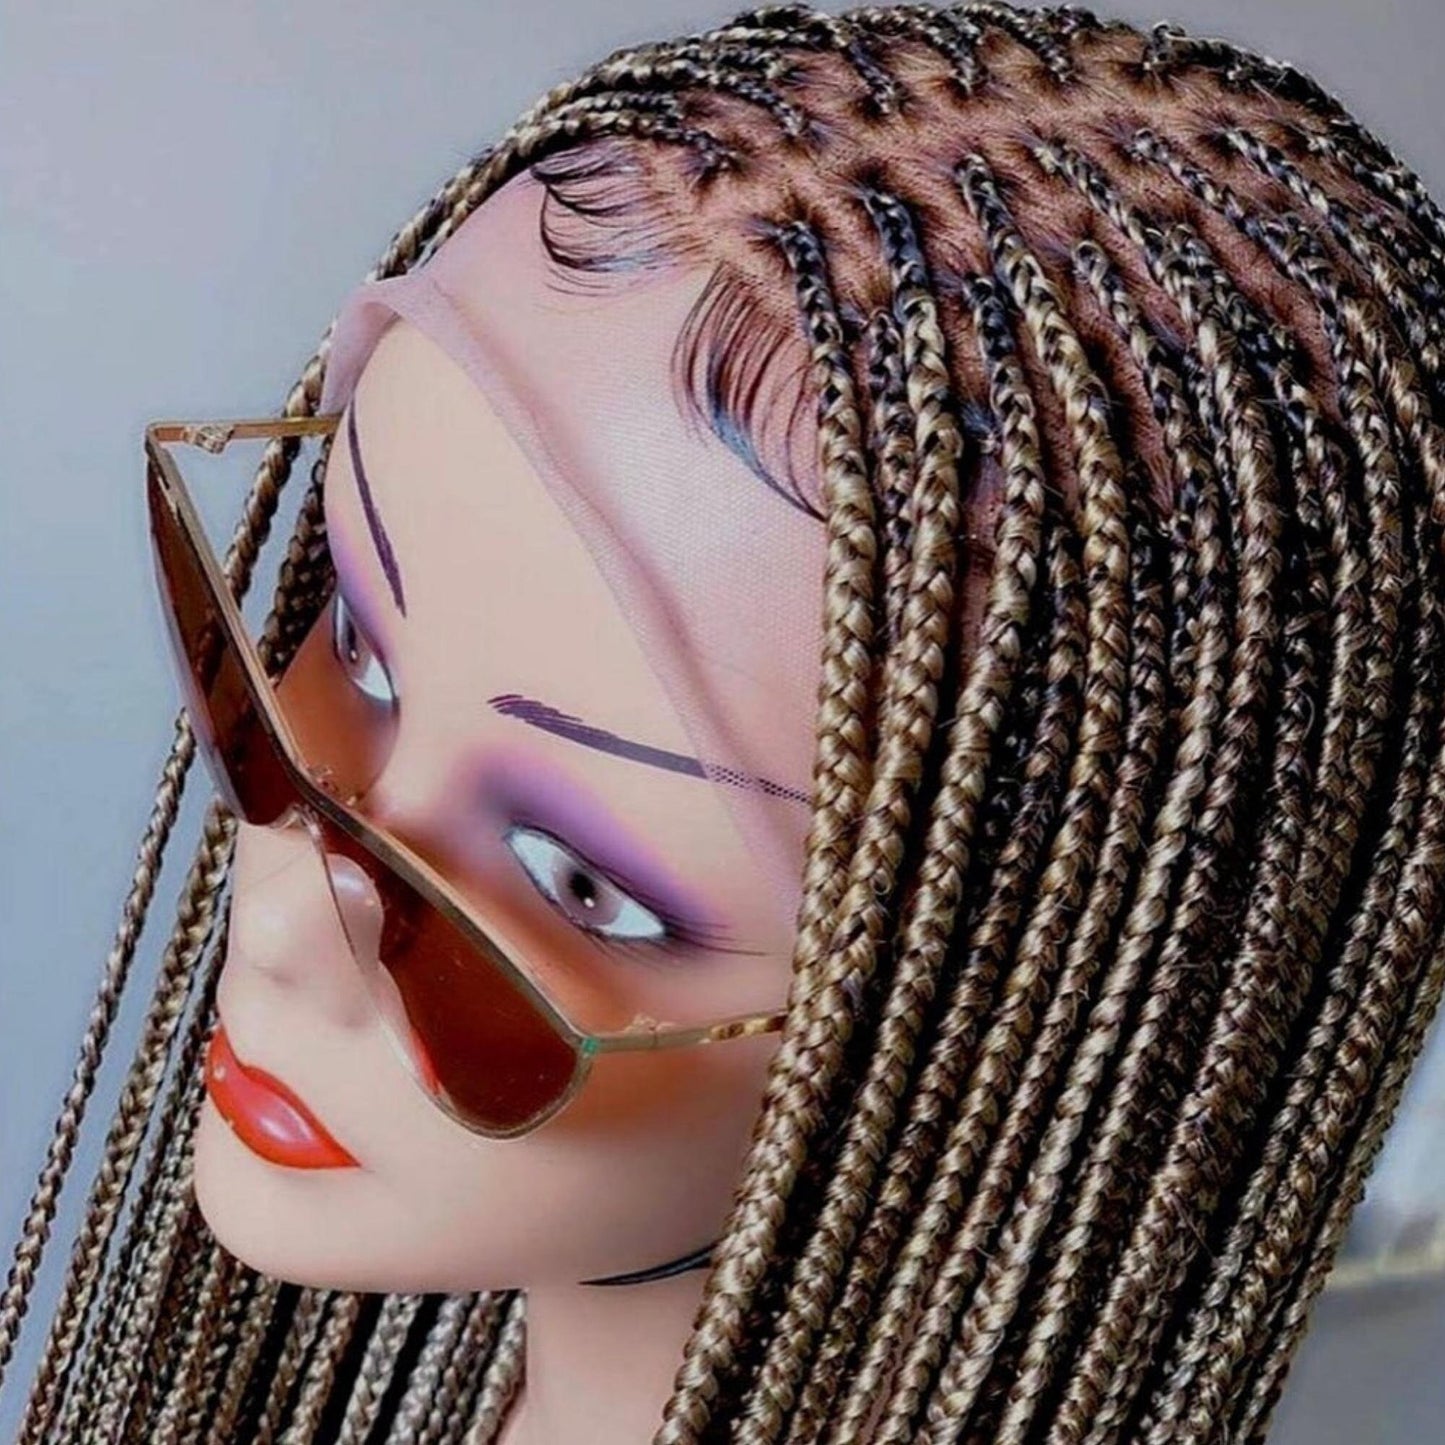 2 in 1 set of braided wig- knotless box braids wig for black women- cornrows wig Available in Different Lengths & Colors human hair lace